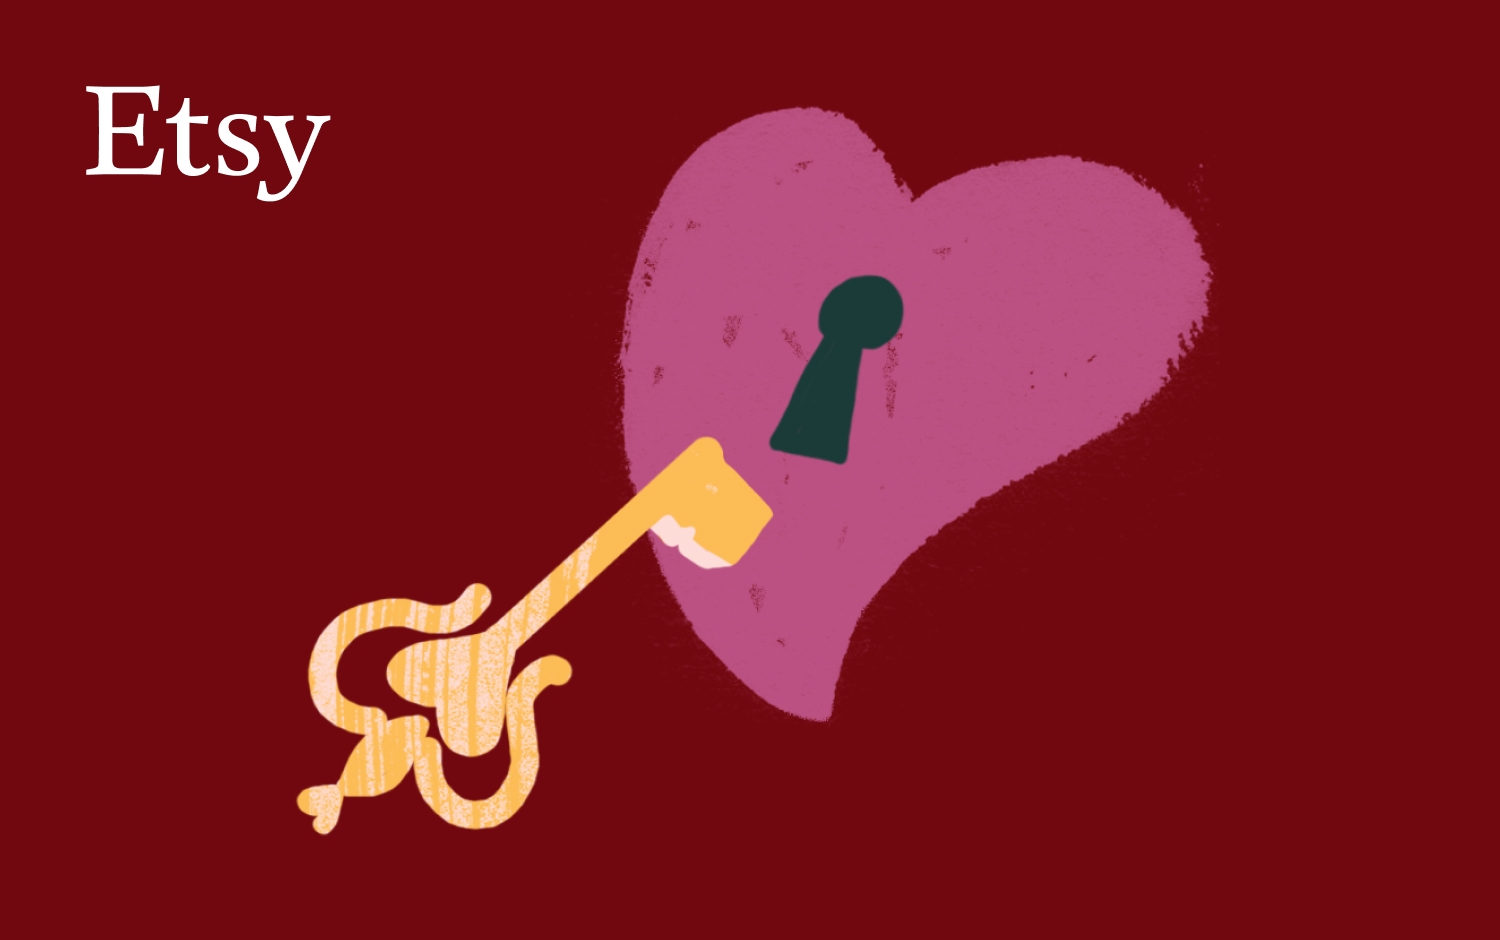 Illustration featuring a large purple heart with a black keyhole. A golden key with intricate details is inserted into the keyhole. The scene is set on a dark red background with an Etsy logo in white font in the top left corner